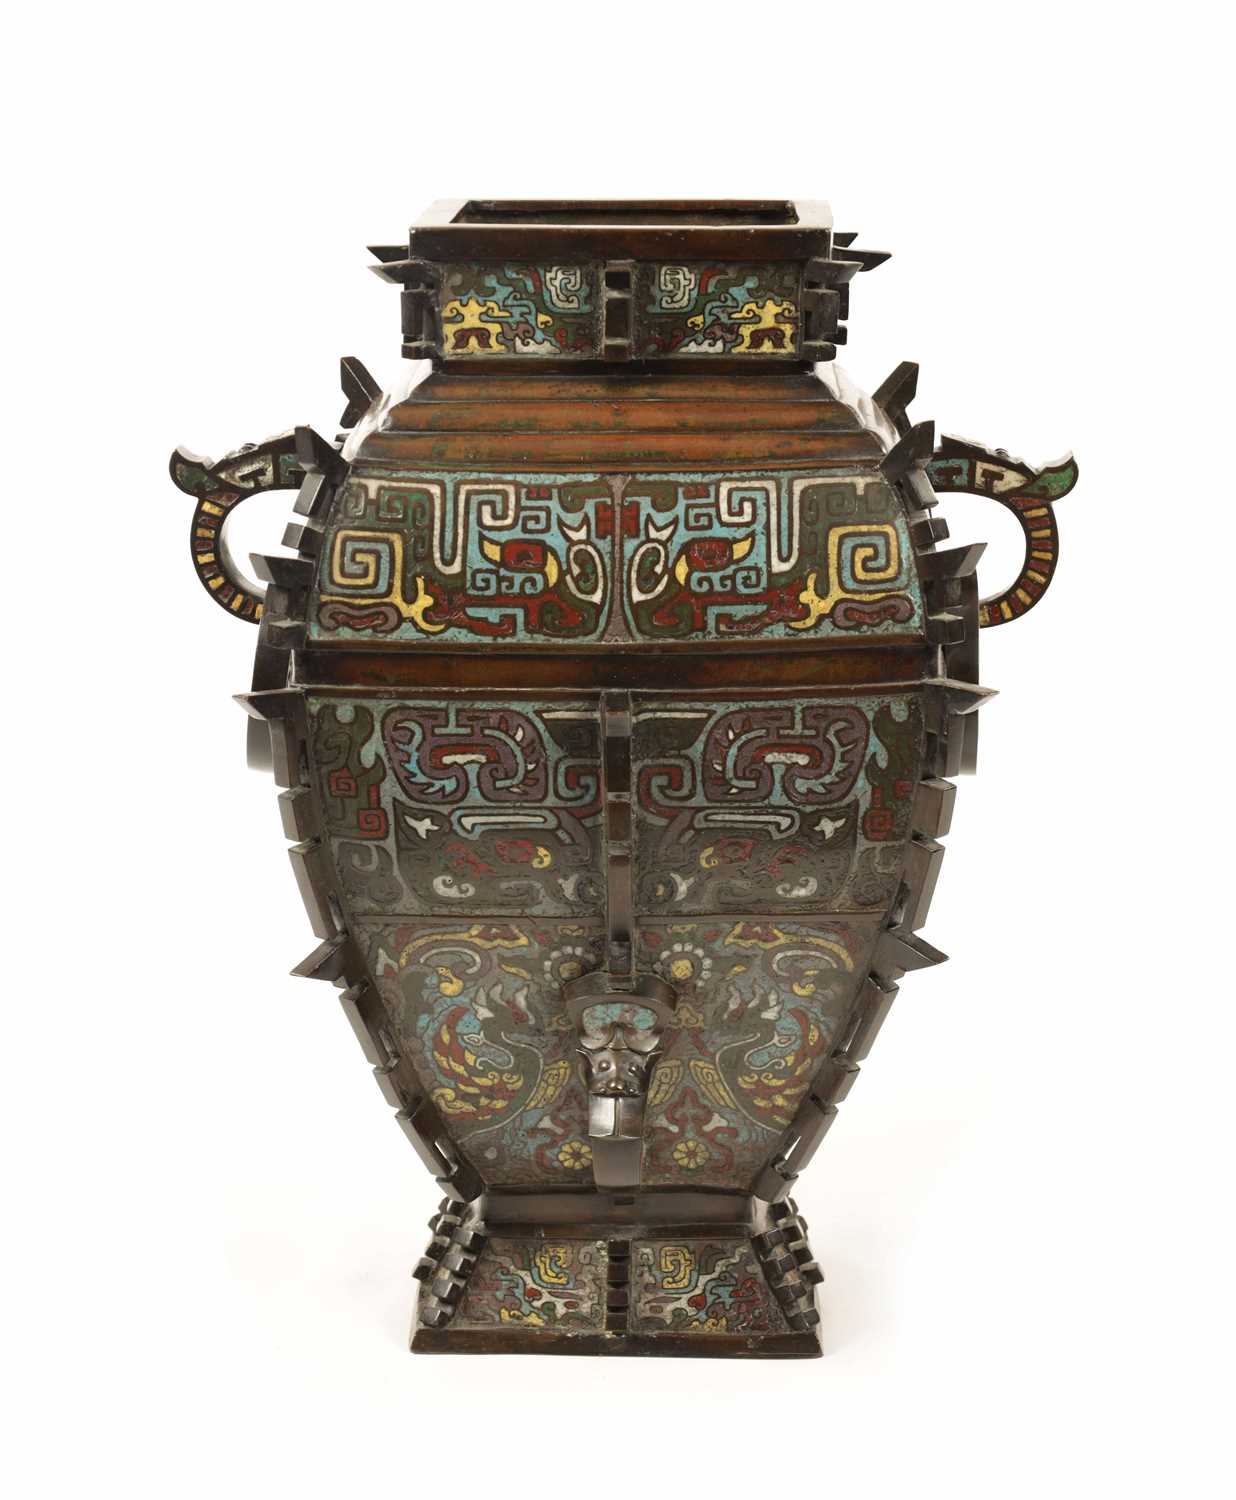 Lot 78 - A RARE AND LARGE CHINESE CLOISONNE AND BRONZE RITUAL WINE VESSEL, FANGYI